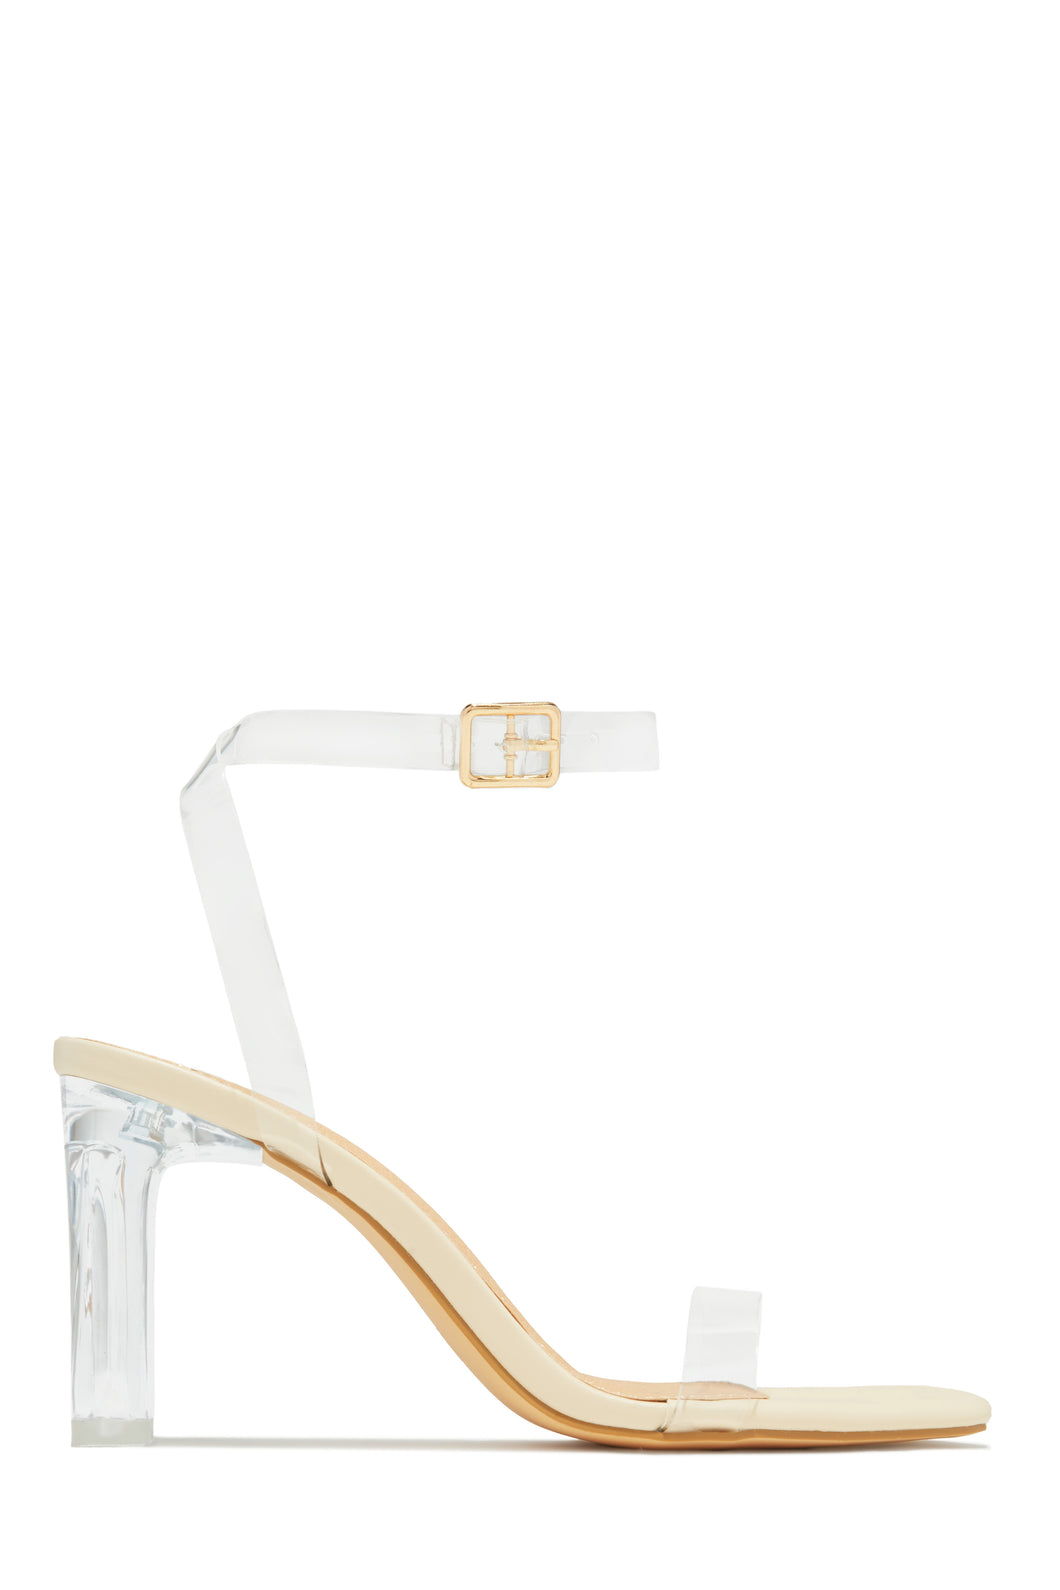 Simply Yours Clear Ankle Strap Heels - Ivory